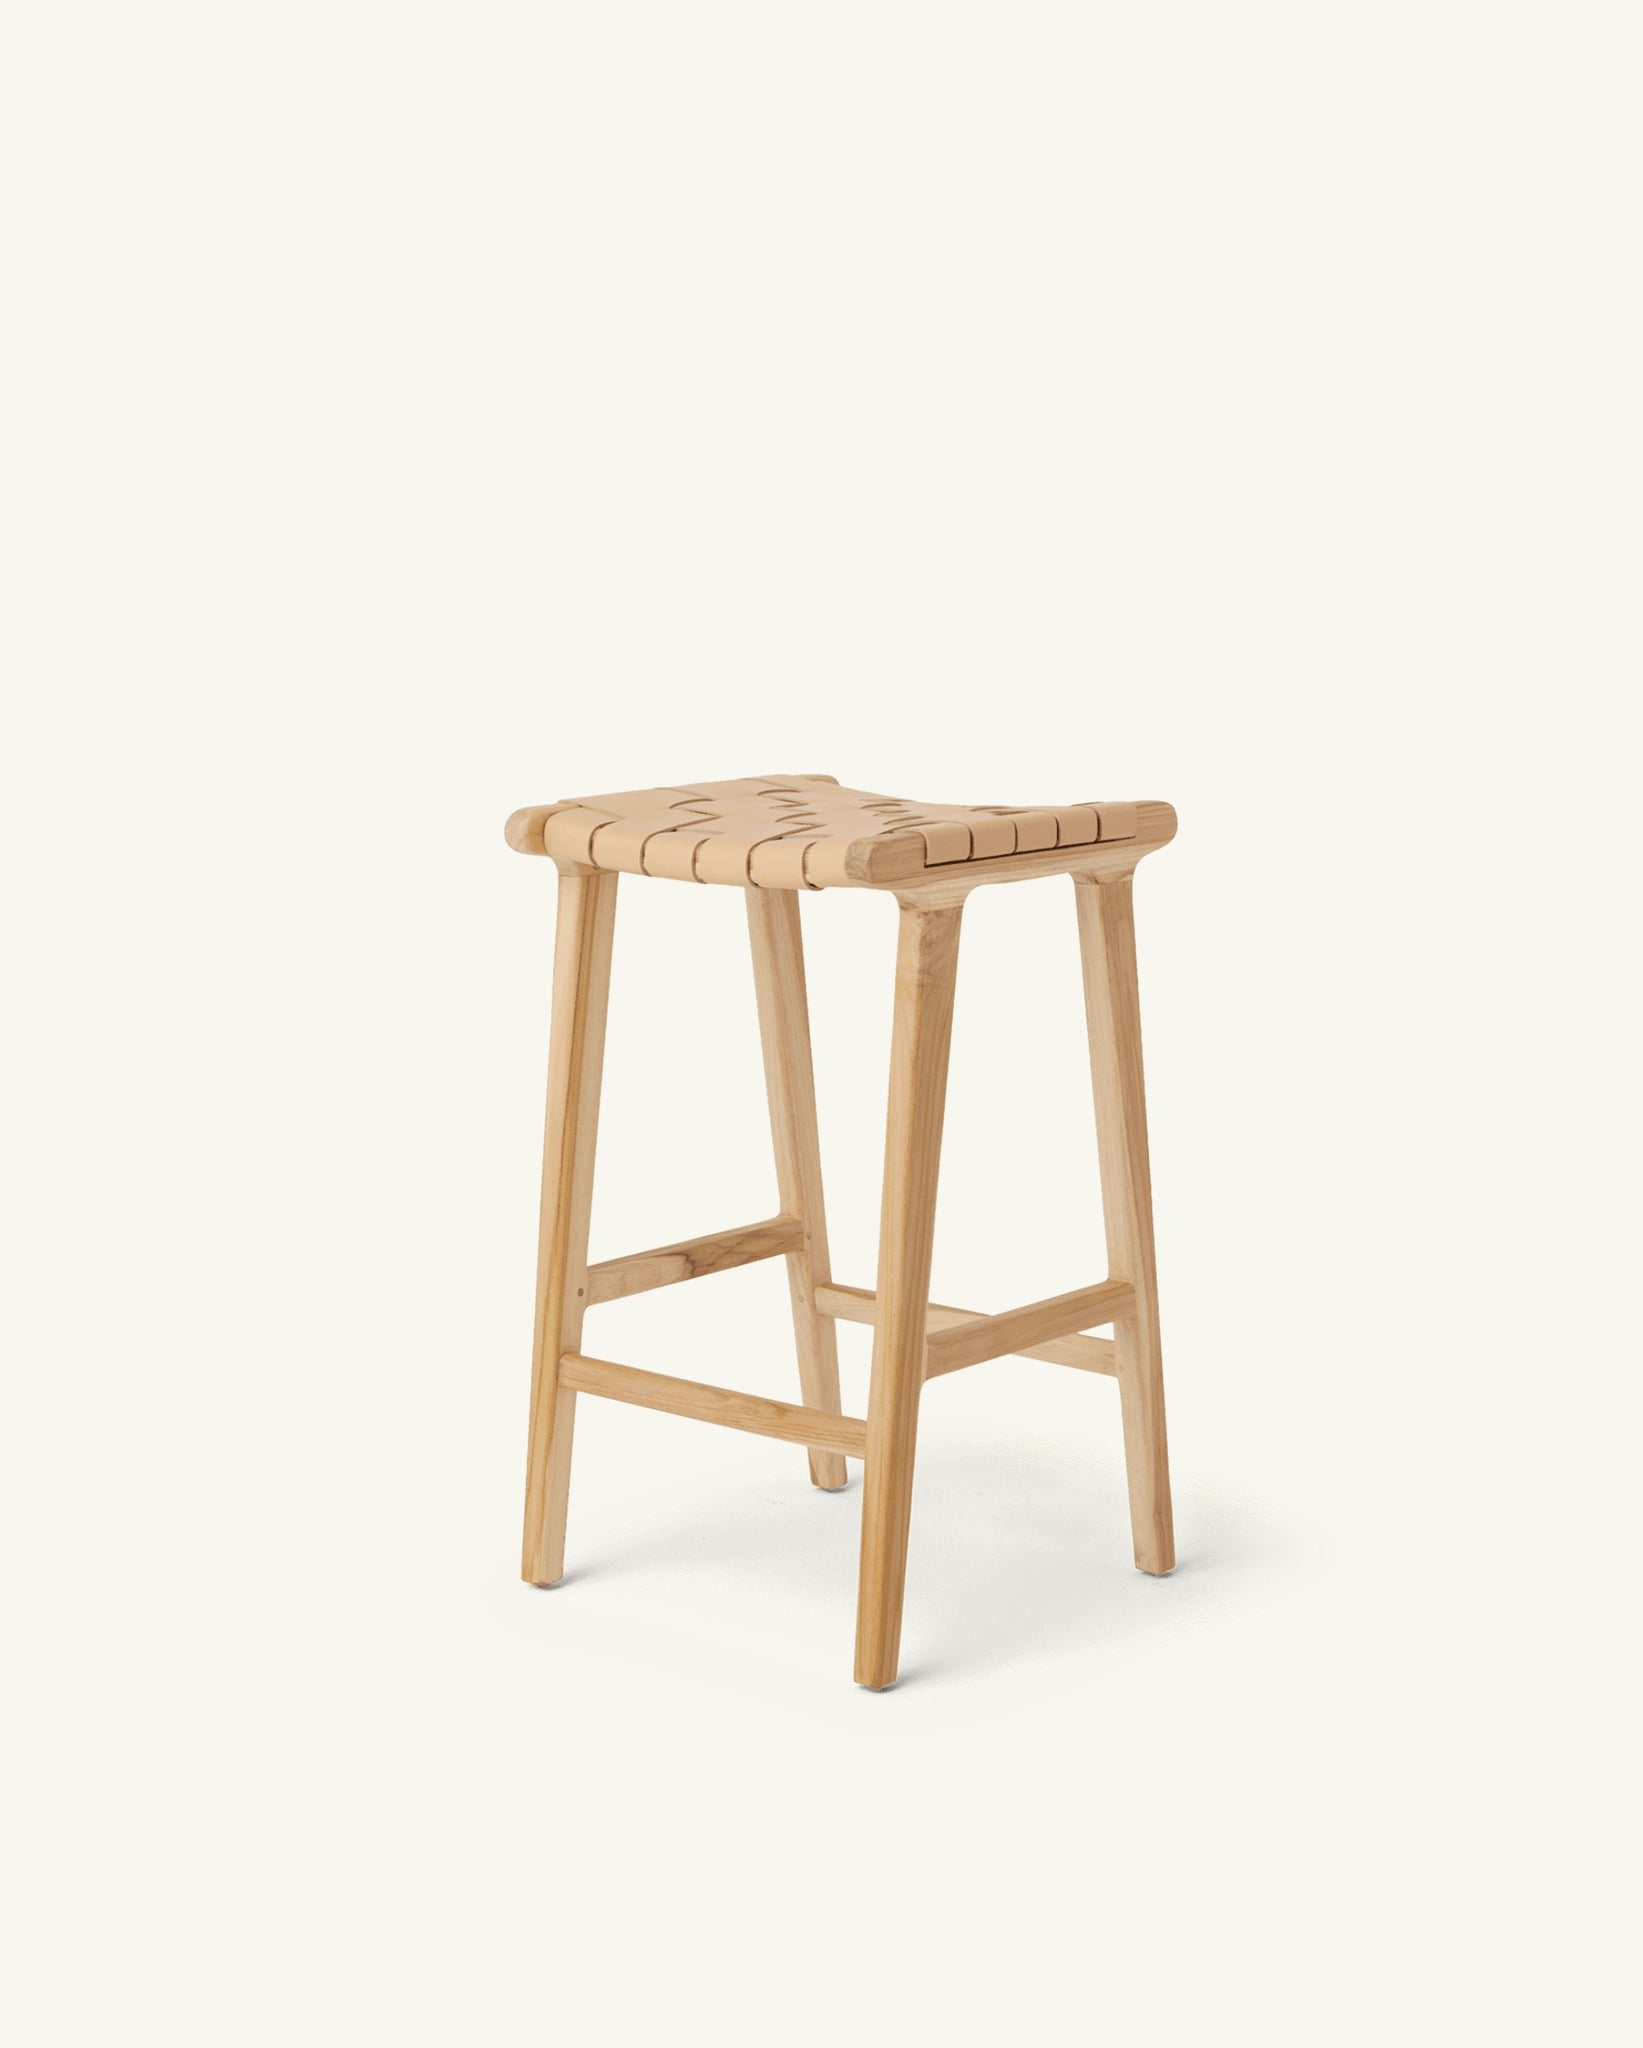 stool #3 in natural